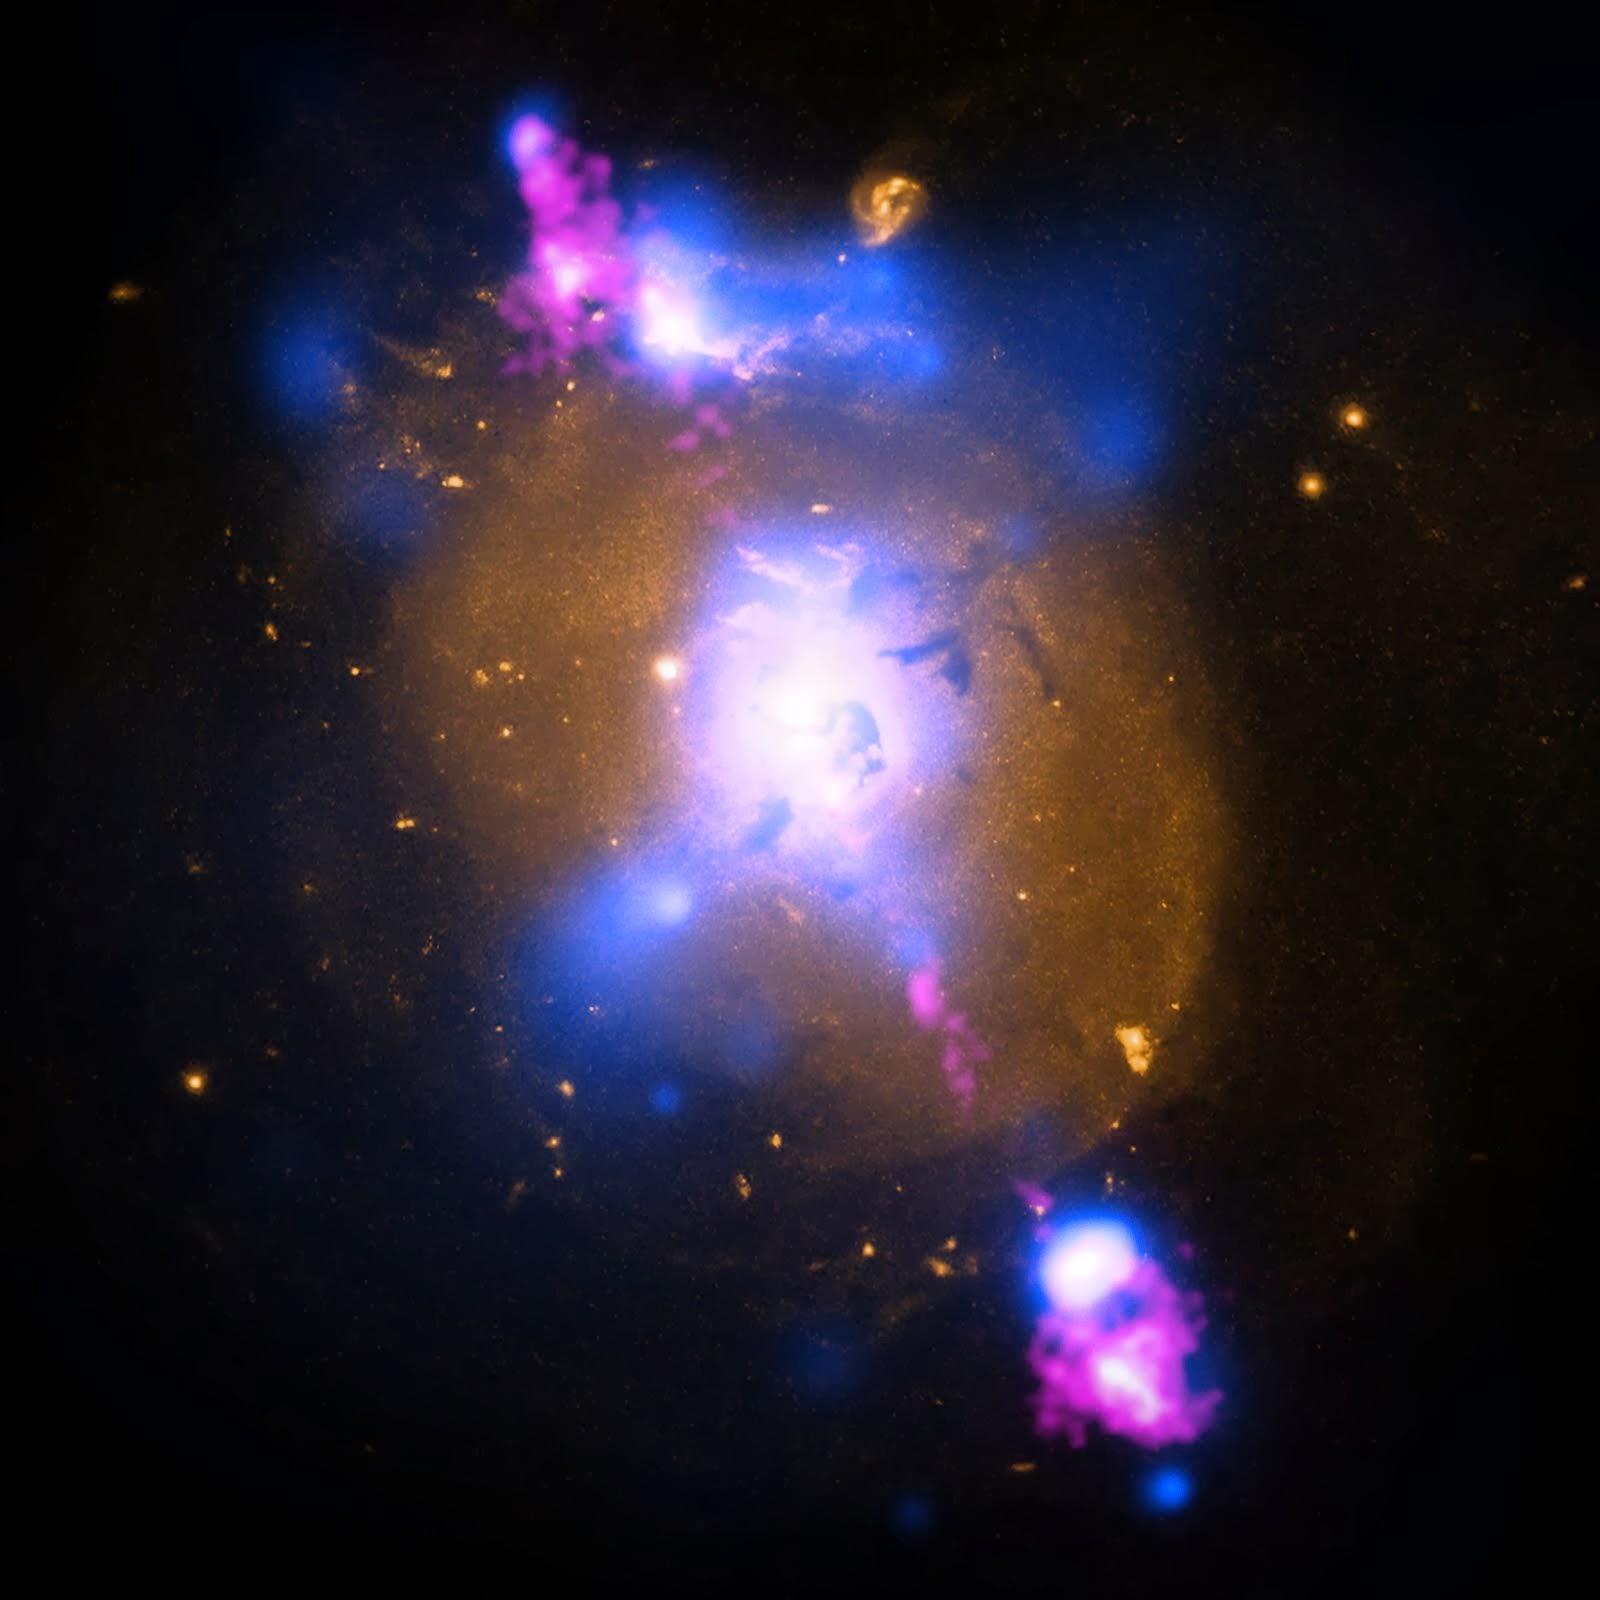 4C+29.30: Black Hole Powered Jets Plow Into Galaxy